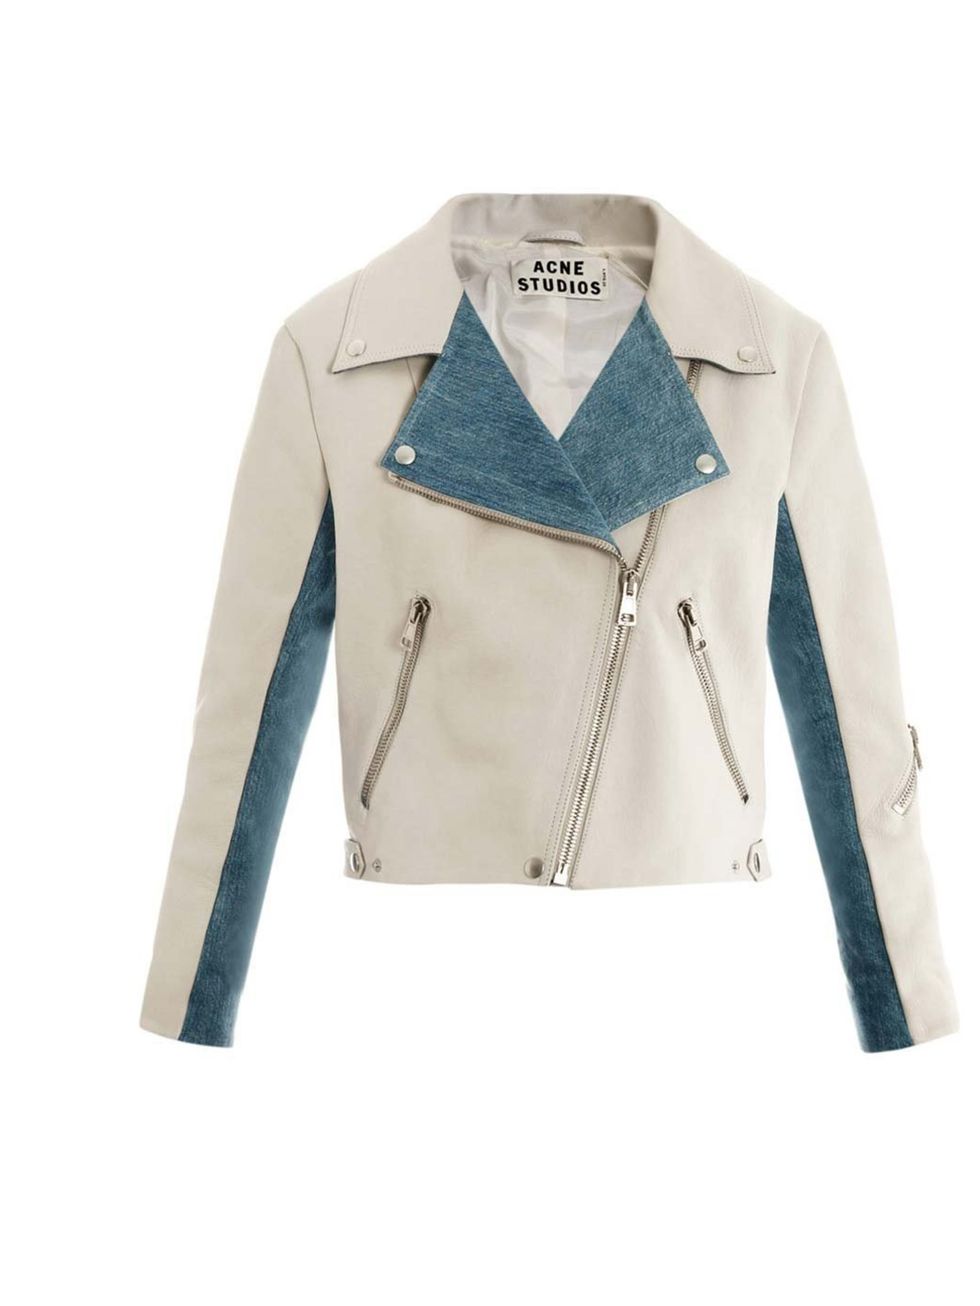 <p>Acne 'Rita' leather and denim jacket, £850, available from <a href="http://www.matchesfashion.com/product/138115">Matches</a></p>